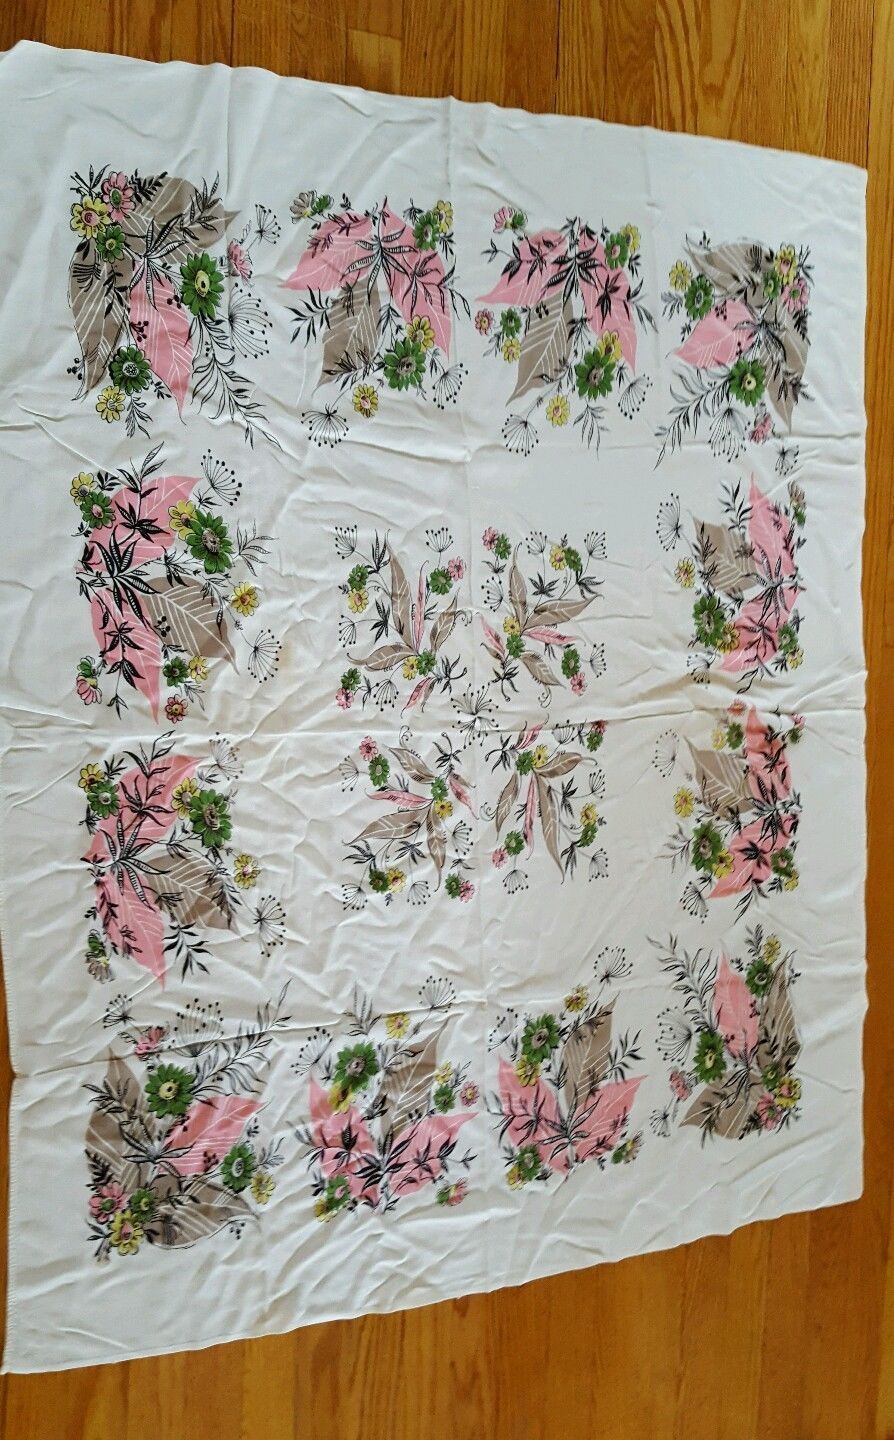 Vintage Tablecloth Pink Green Black flowers on white 51 x 41 inches VGC - $10.84